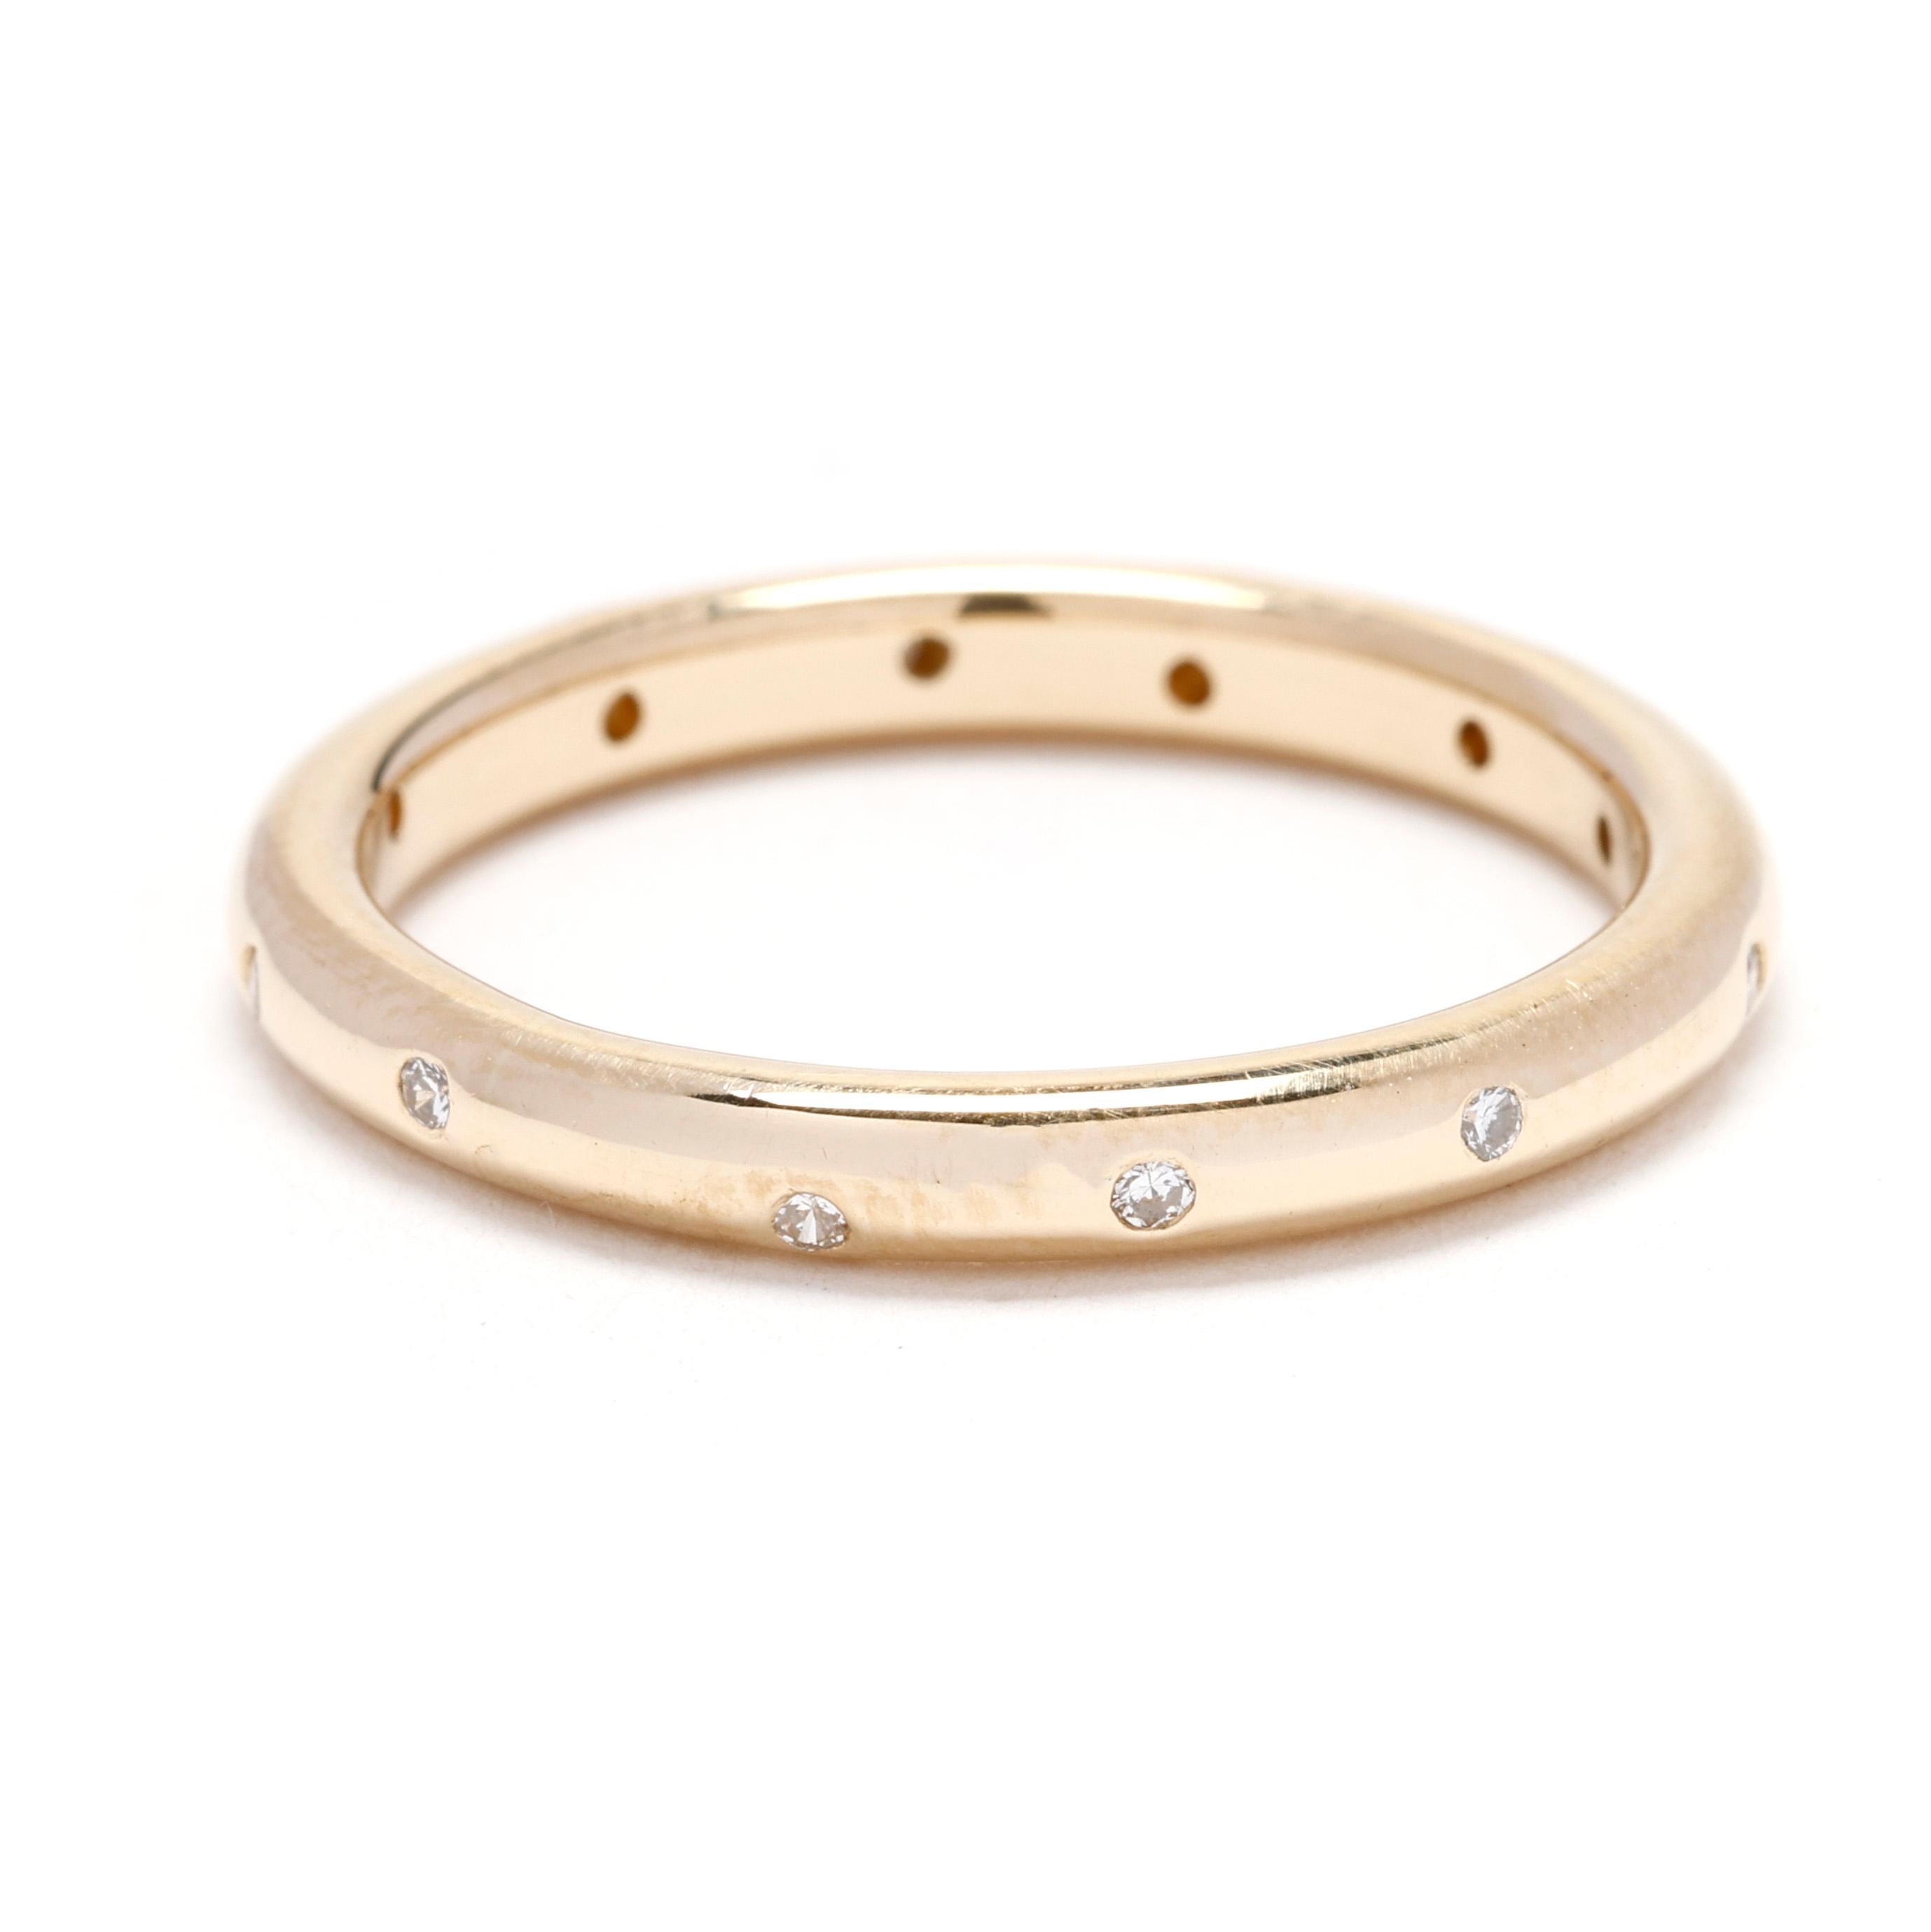 Discover understated elegance with this delicate 0.06ctw Scattered Diamond Band Ring. Crafted in luxurious 18k yellow gold, this minimalist ring features a unique design with scattered diamonds, creating a subtle yet captivating sparkle that is both